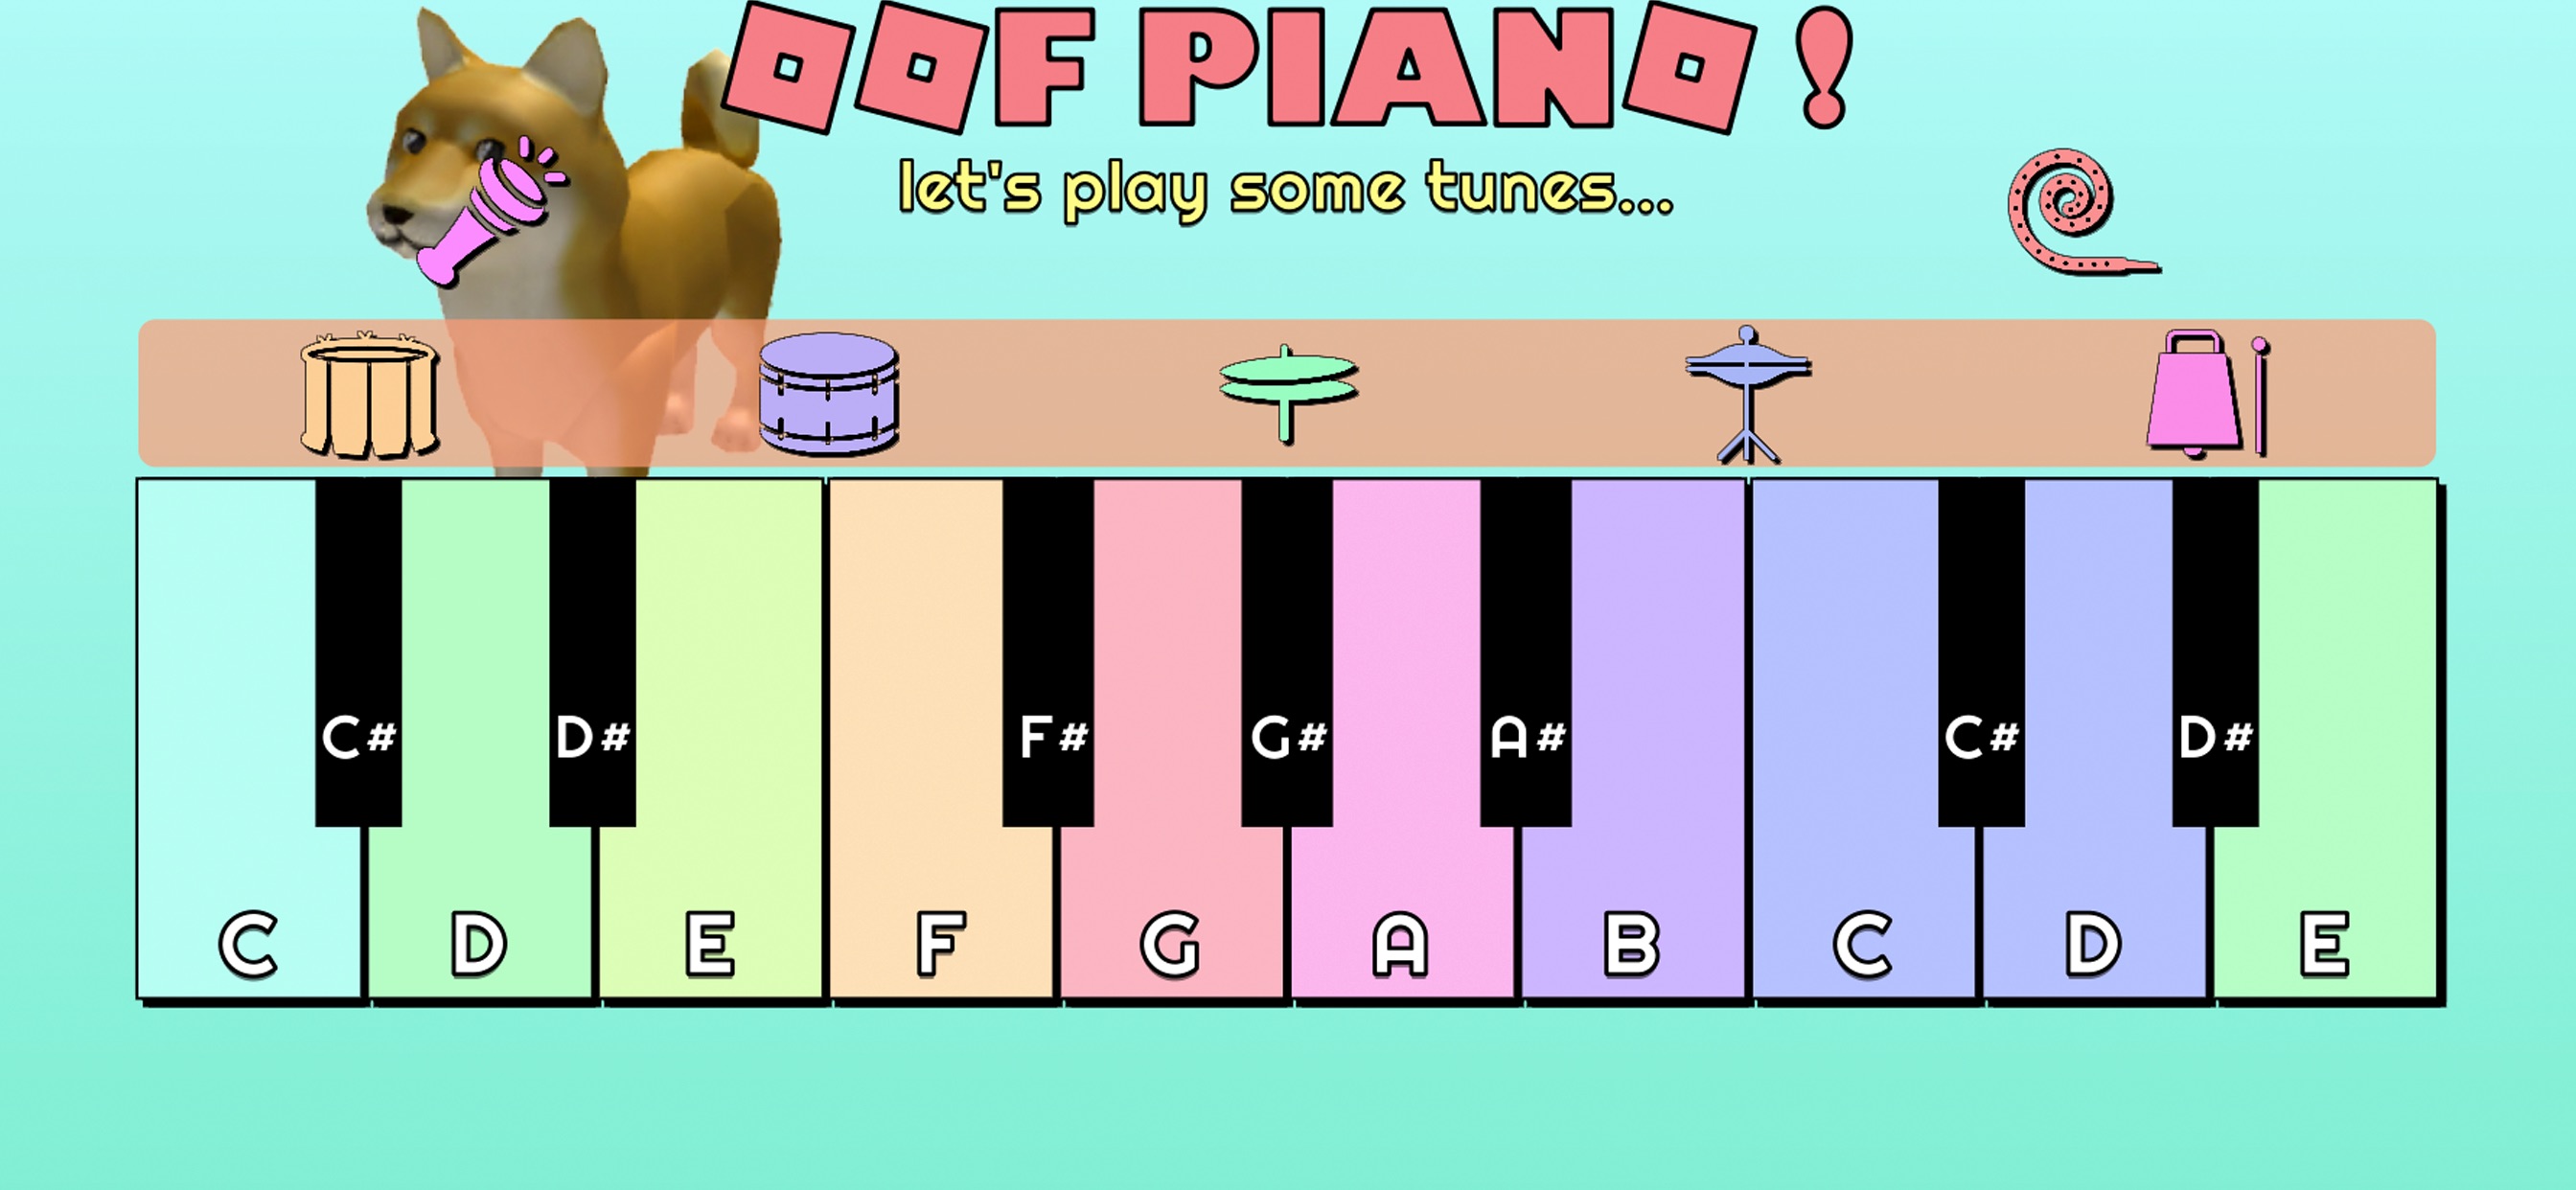 Oof Piano For Roblox Robux App Store Review Aso Revenue Downloads Appfollow - roblux quiz for roblox robux by isabel fonte ios united